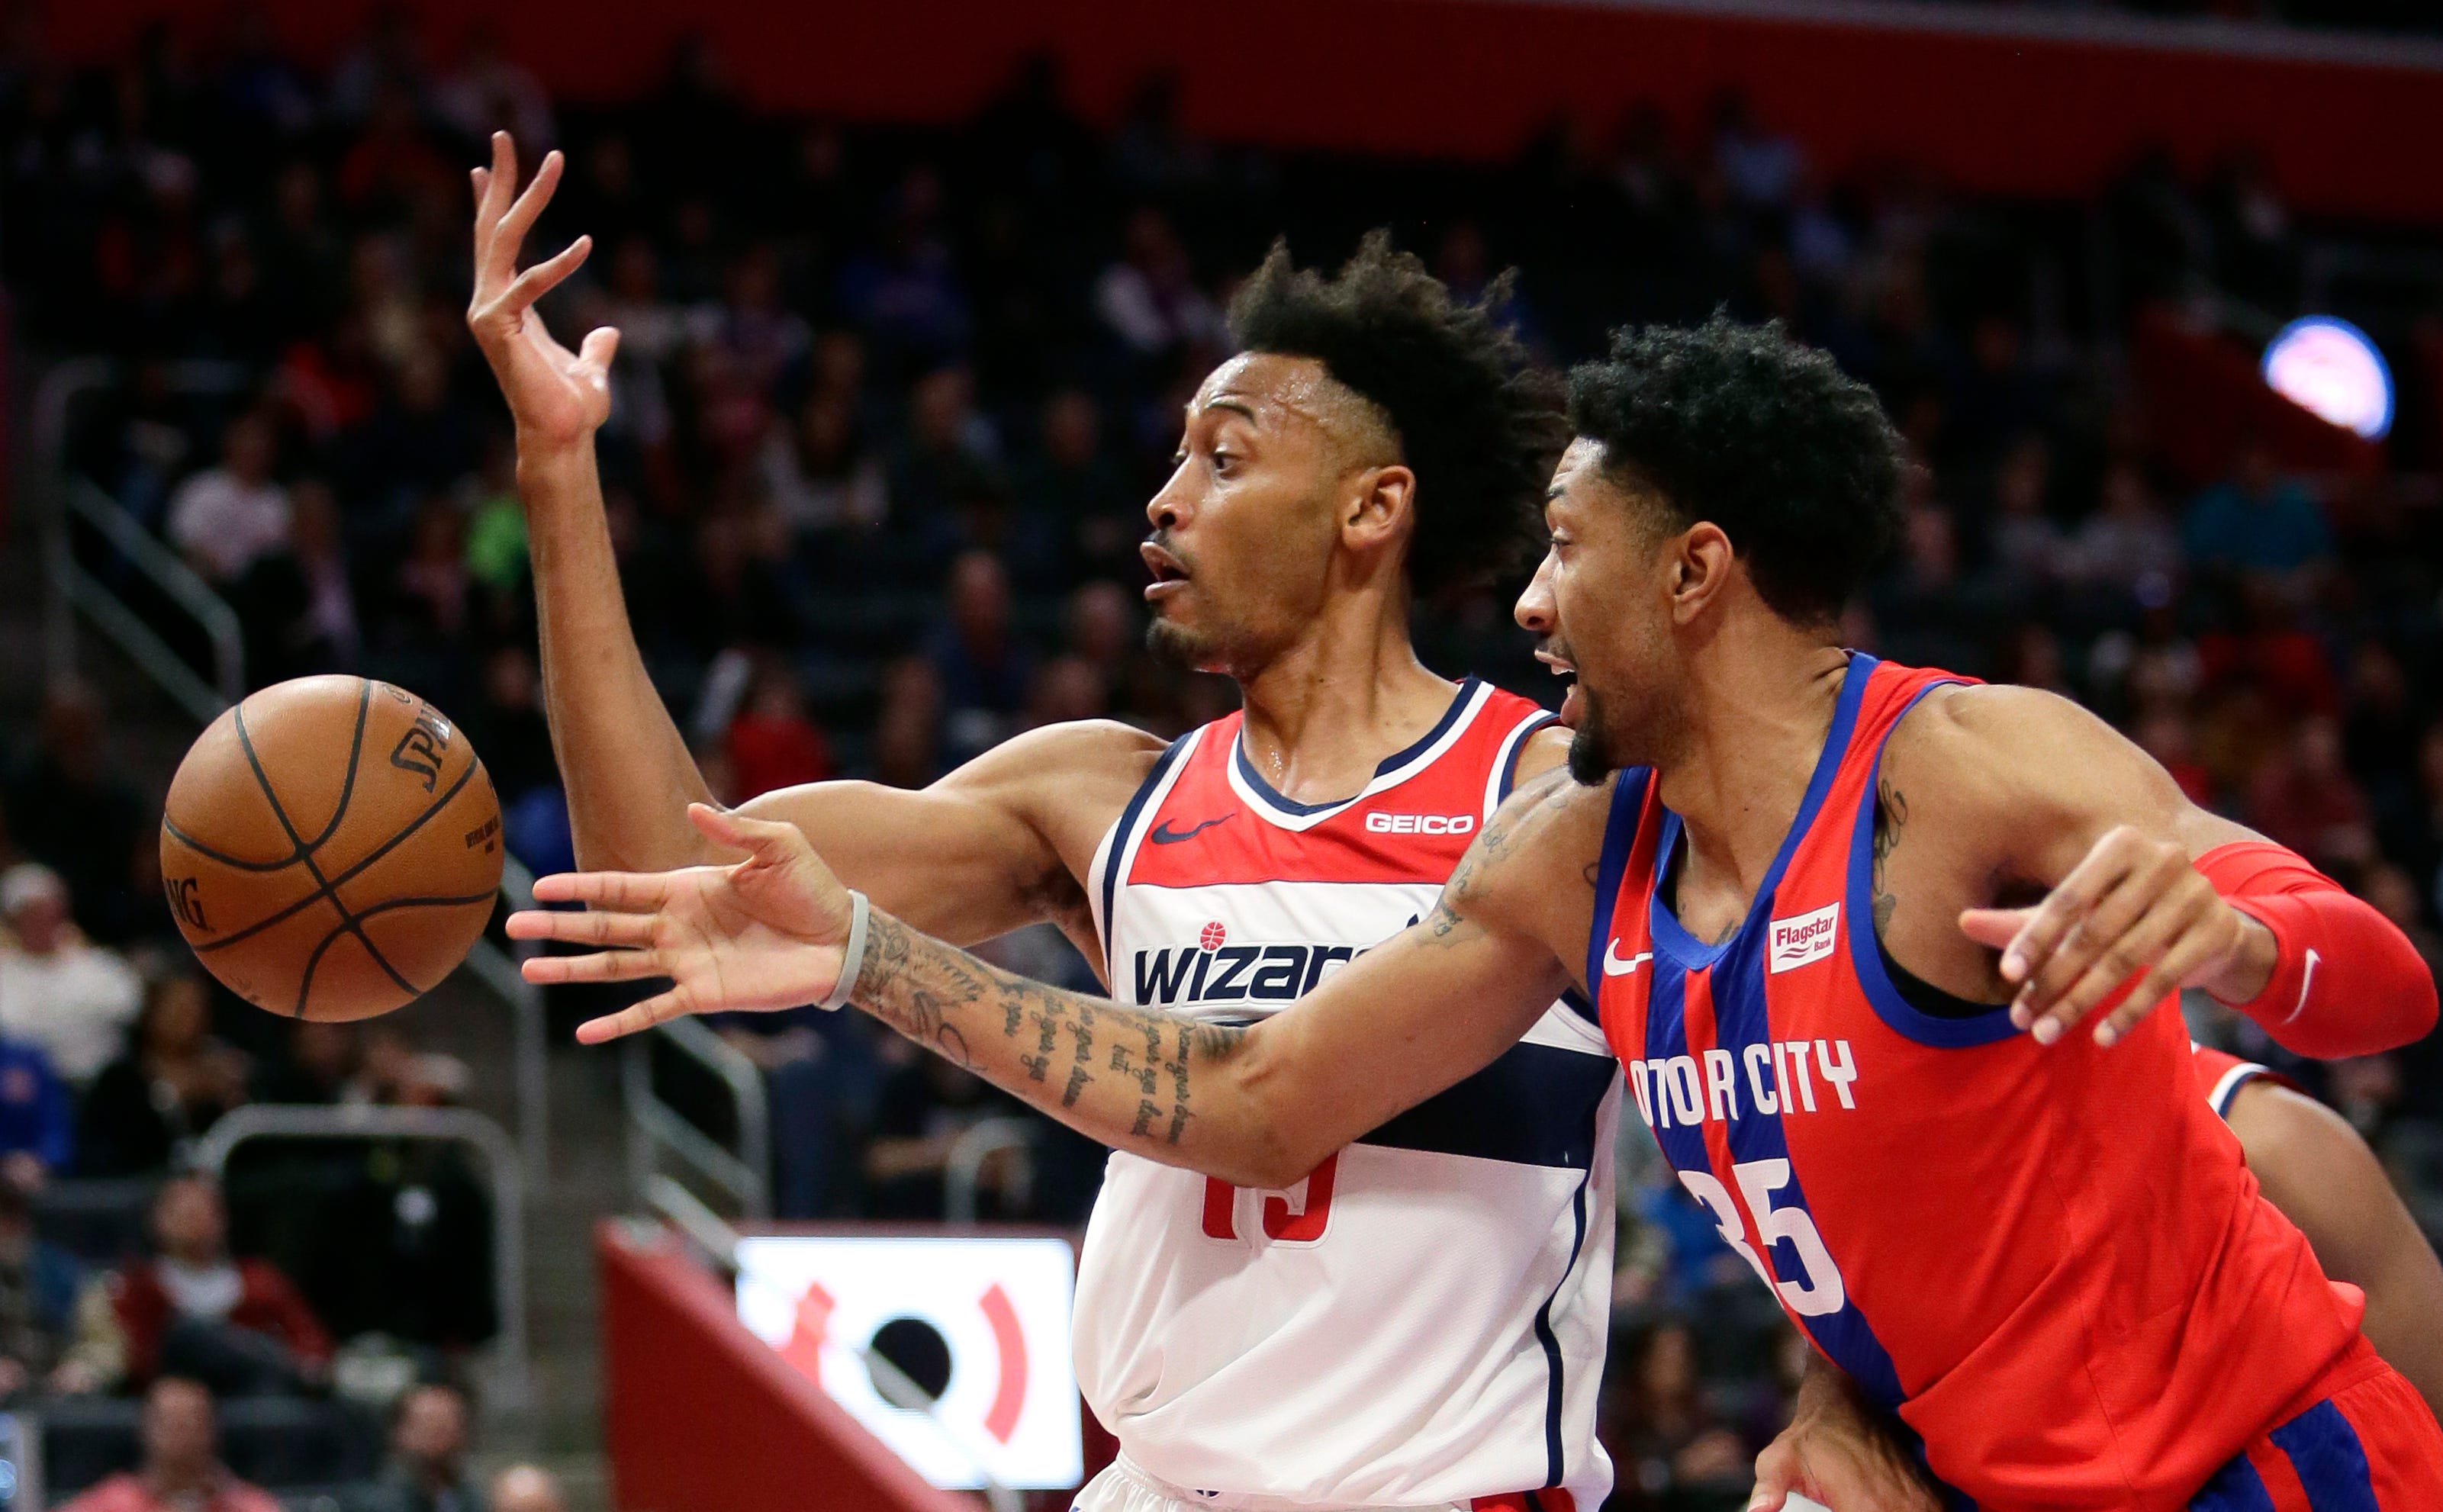 Washington Wizards forward Johnathan Williams, left, loses the ball against Detroit Pistons forward Christian Wood (35) during the second half.